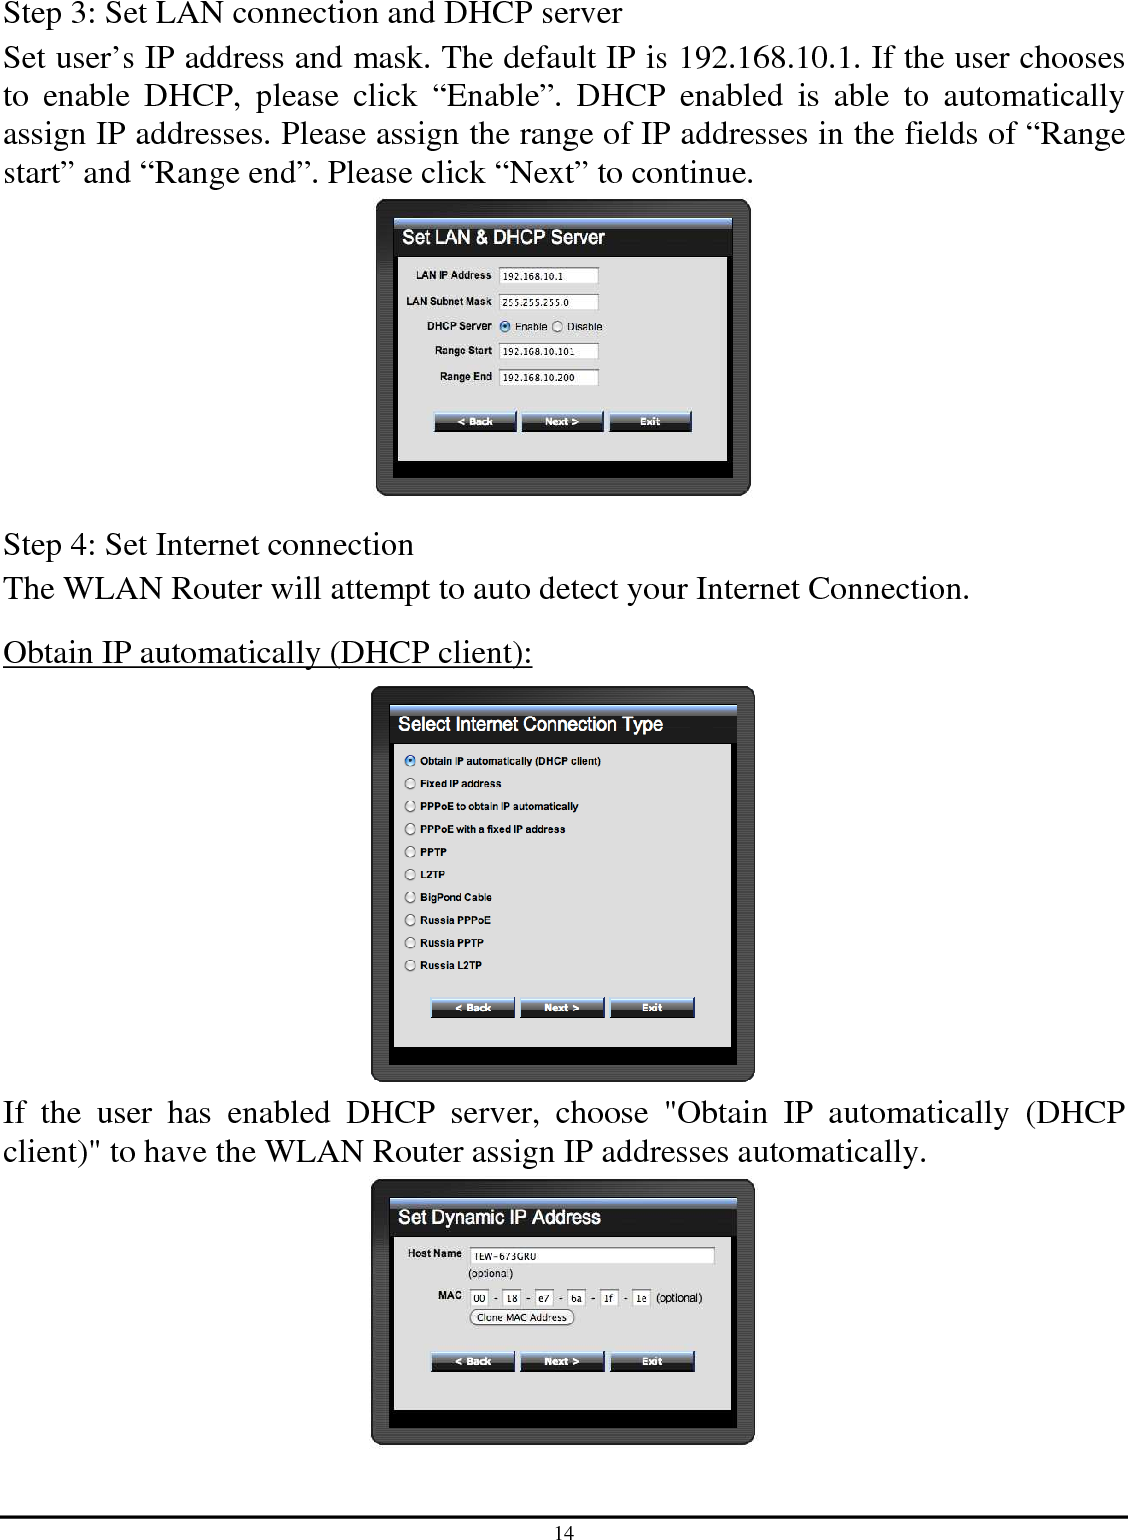 14 Step 3: Set LAN connection and DHCP server Set user’s IP address and mask. The default IP is 192.168.10.1. If the user chooses to  enable  DHCP,  please  click  “Enable”.  DHCP  enabled  is  able  to  automatically assign IP addresses. Please assign the range of IP addresses in the fields of “Range start” and “Range end”. Please click “Next” to continue.  Step 4: Set Internet connection The WLAN Router will attempt to auto detect your Internet Connection. Obtain IP automatically (DHCP client):  If  the  user  has  enabled  DHCP  server,  choose  &quot;Obtain  IP  automatically  (DHCP client)&quot; to have the WLAN Router assign IP addresses automatically.  